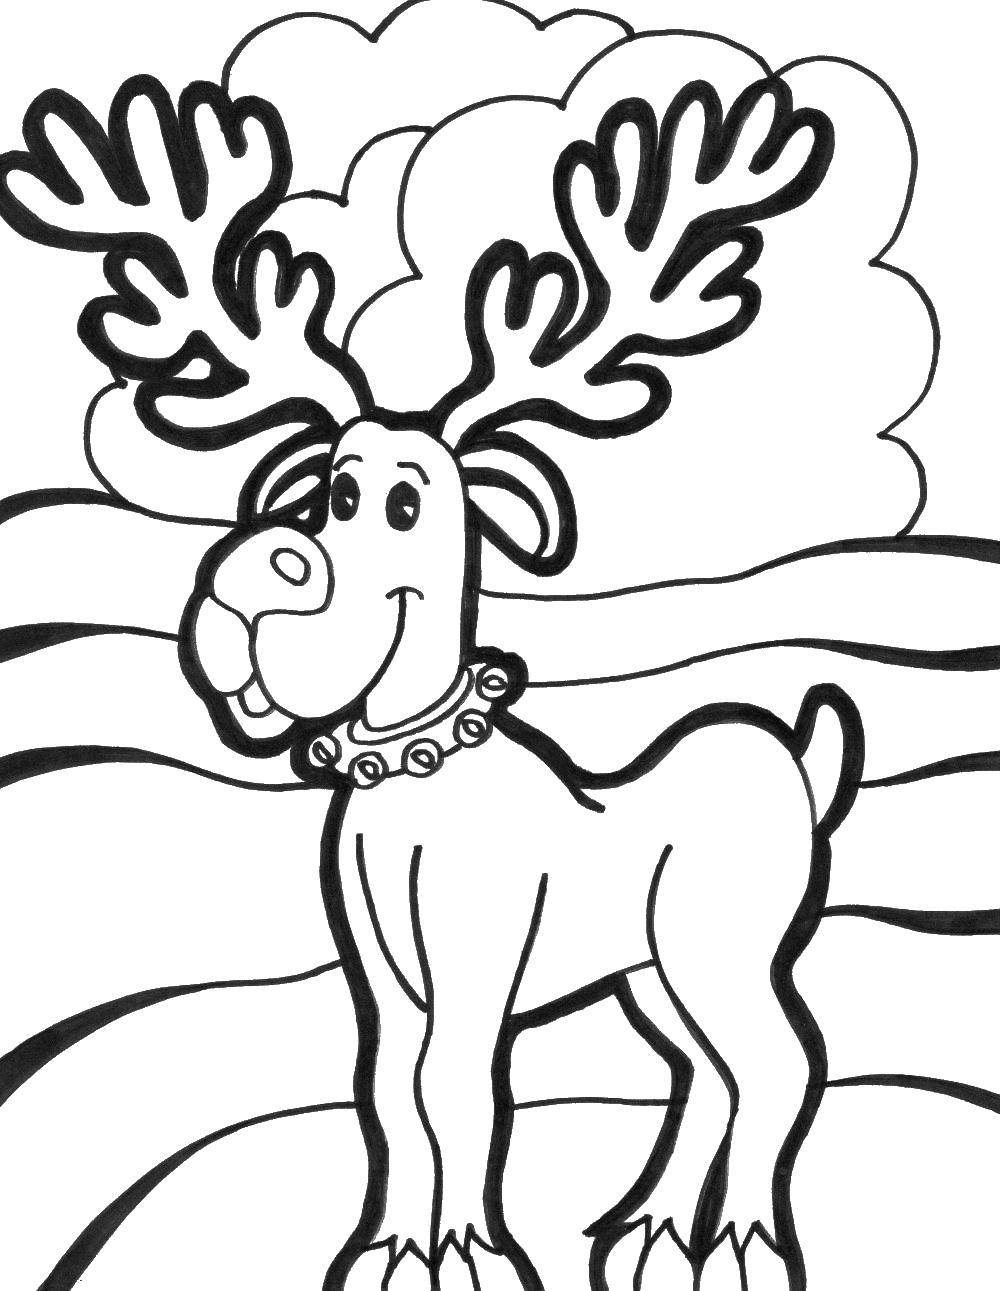 Coloring Rudolph the reindeer. Category Christmas. Tags:  Rudolph, Santa Claus, deer antler.